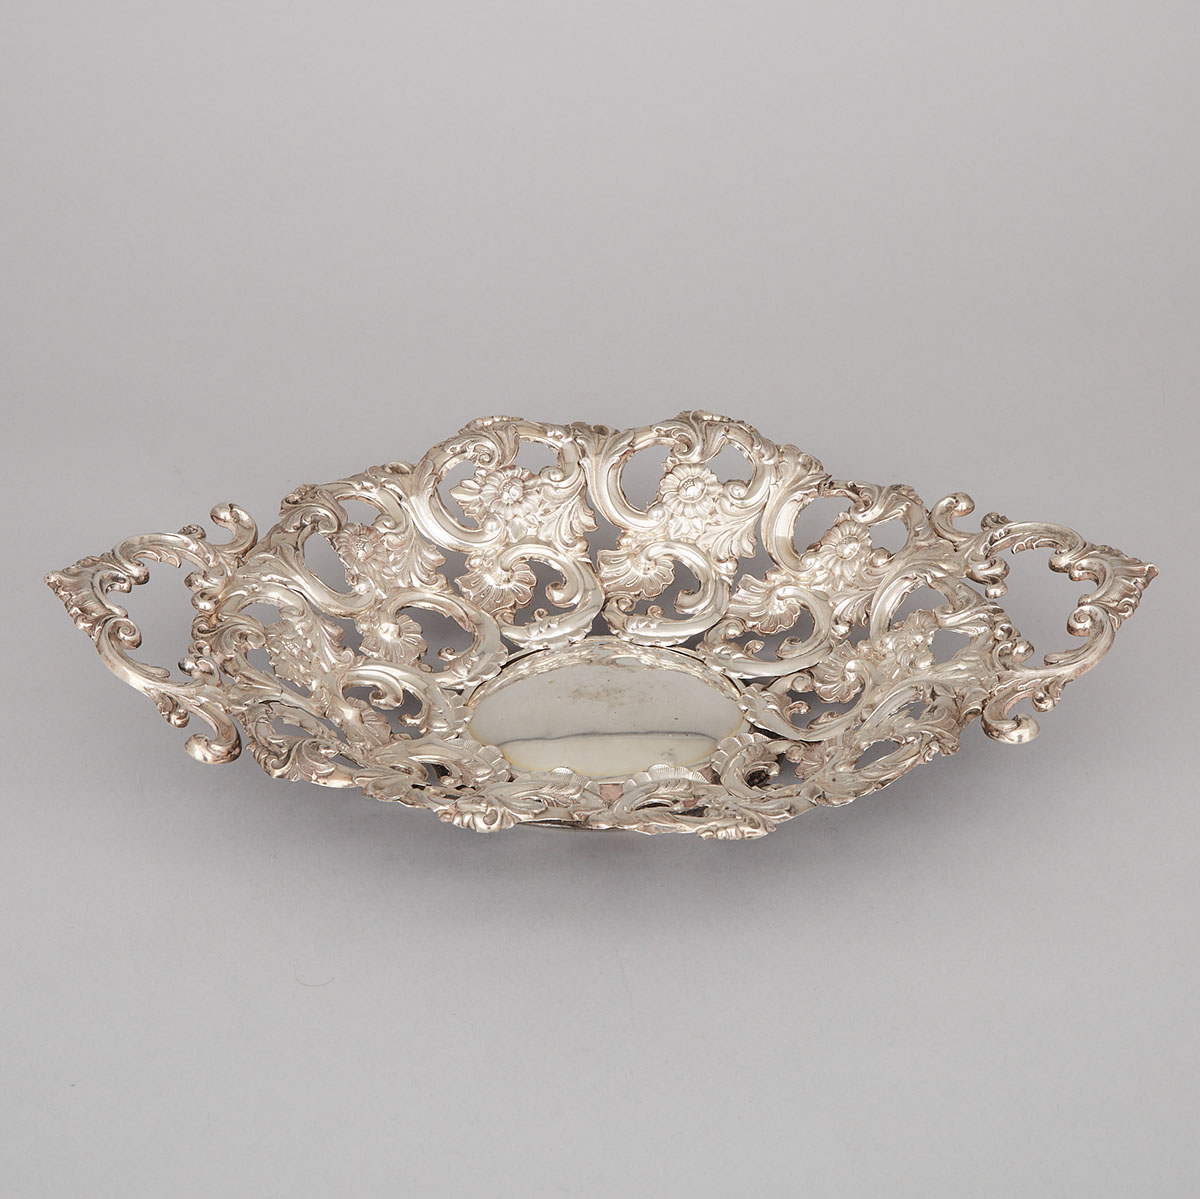 Austro-Hungarian Silver Repoussé Two-Handled Oval Basket, mid-19th century